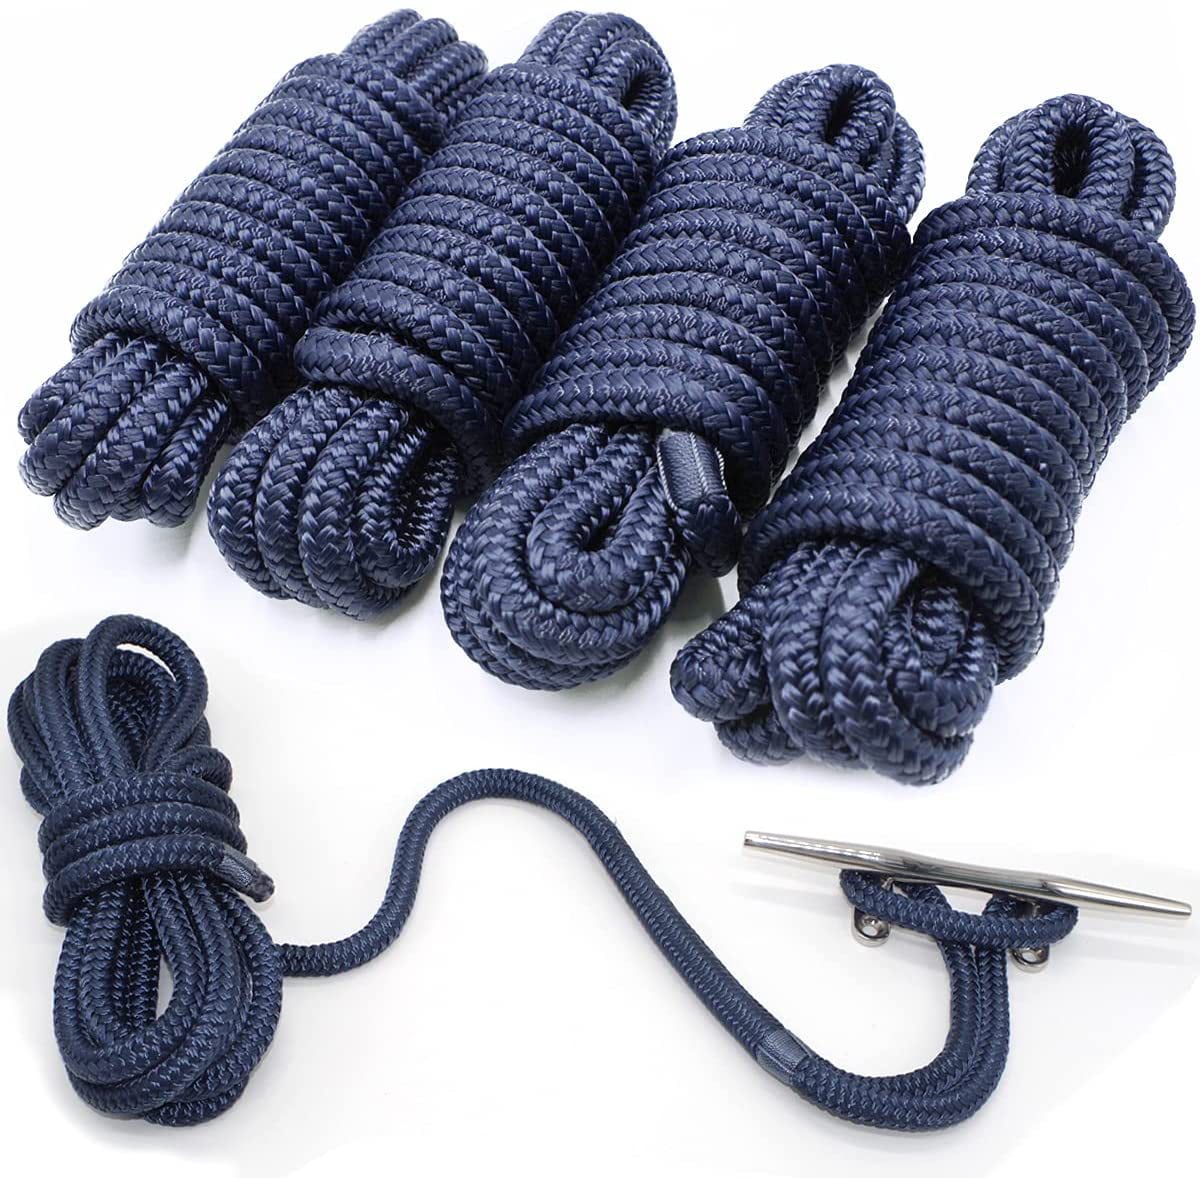 Various Sizes Navy Blue Boats Yachts Braided Mooring/Dock Warp Lines 